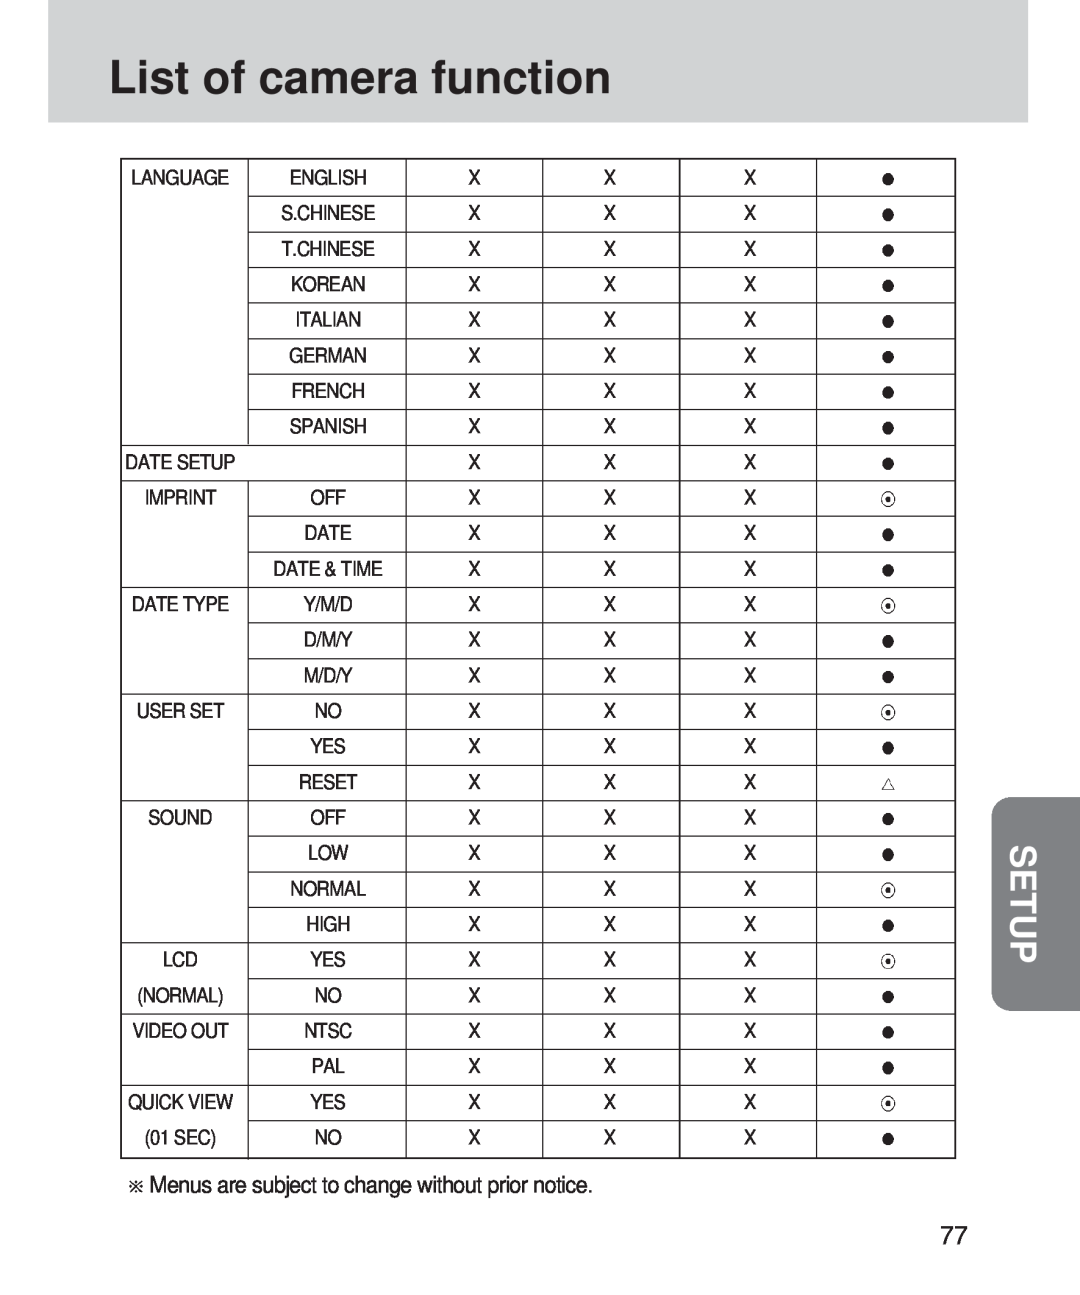 Samsung 420 manual List of camera function, Menus are subject to change without prior notice, Setup 